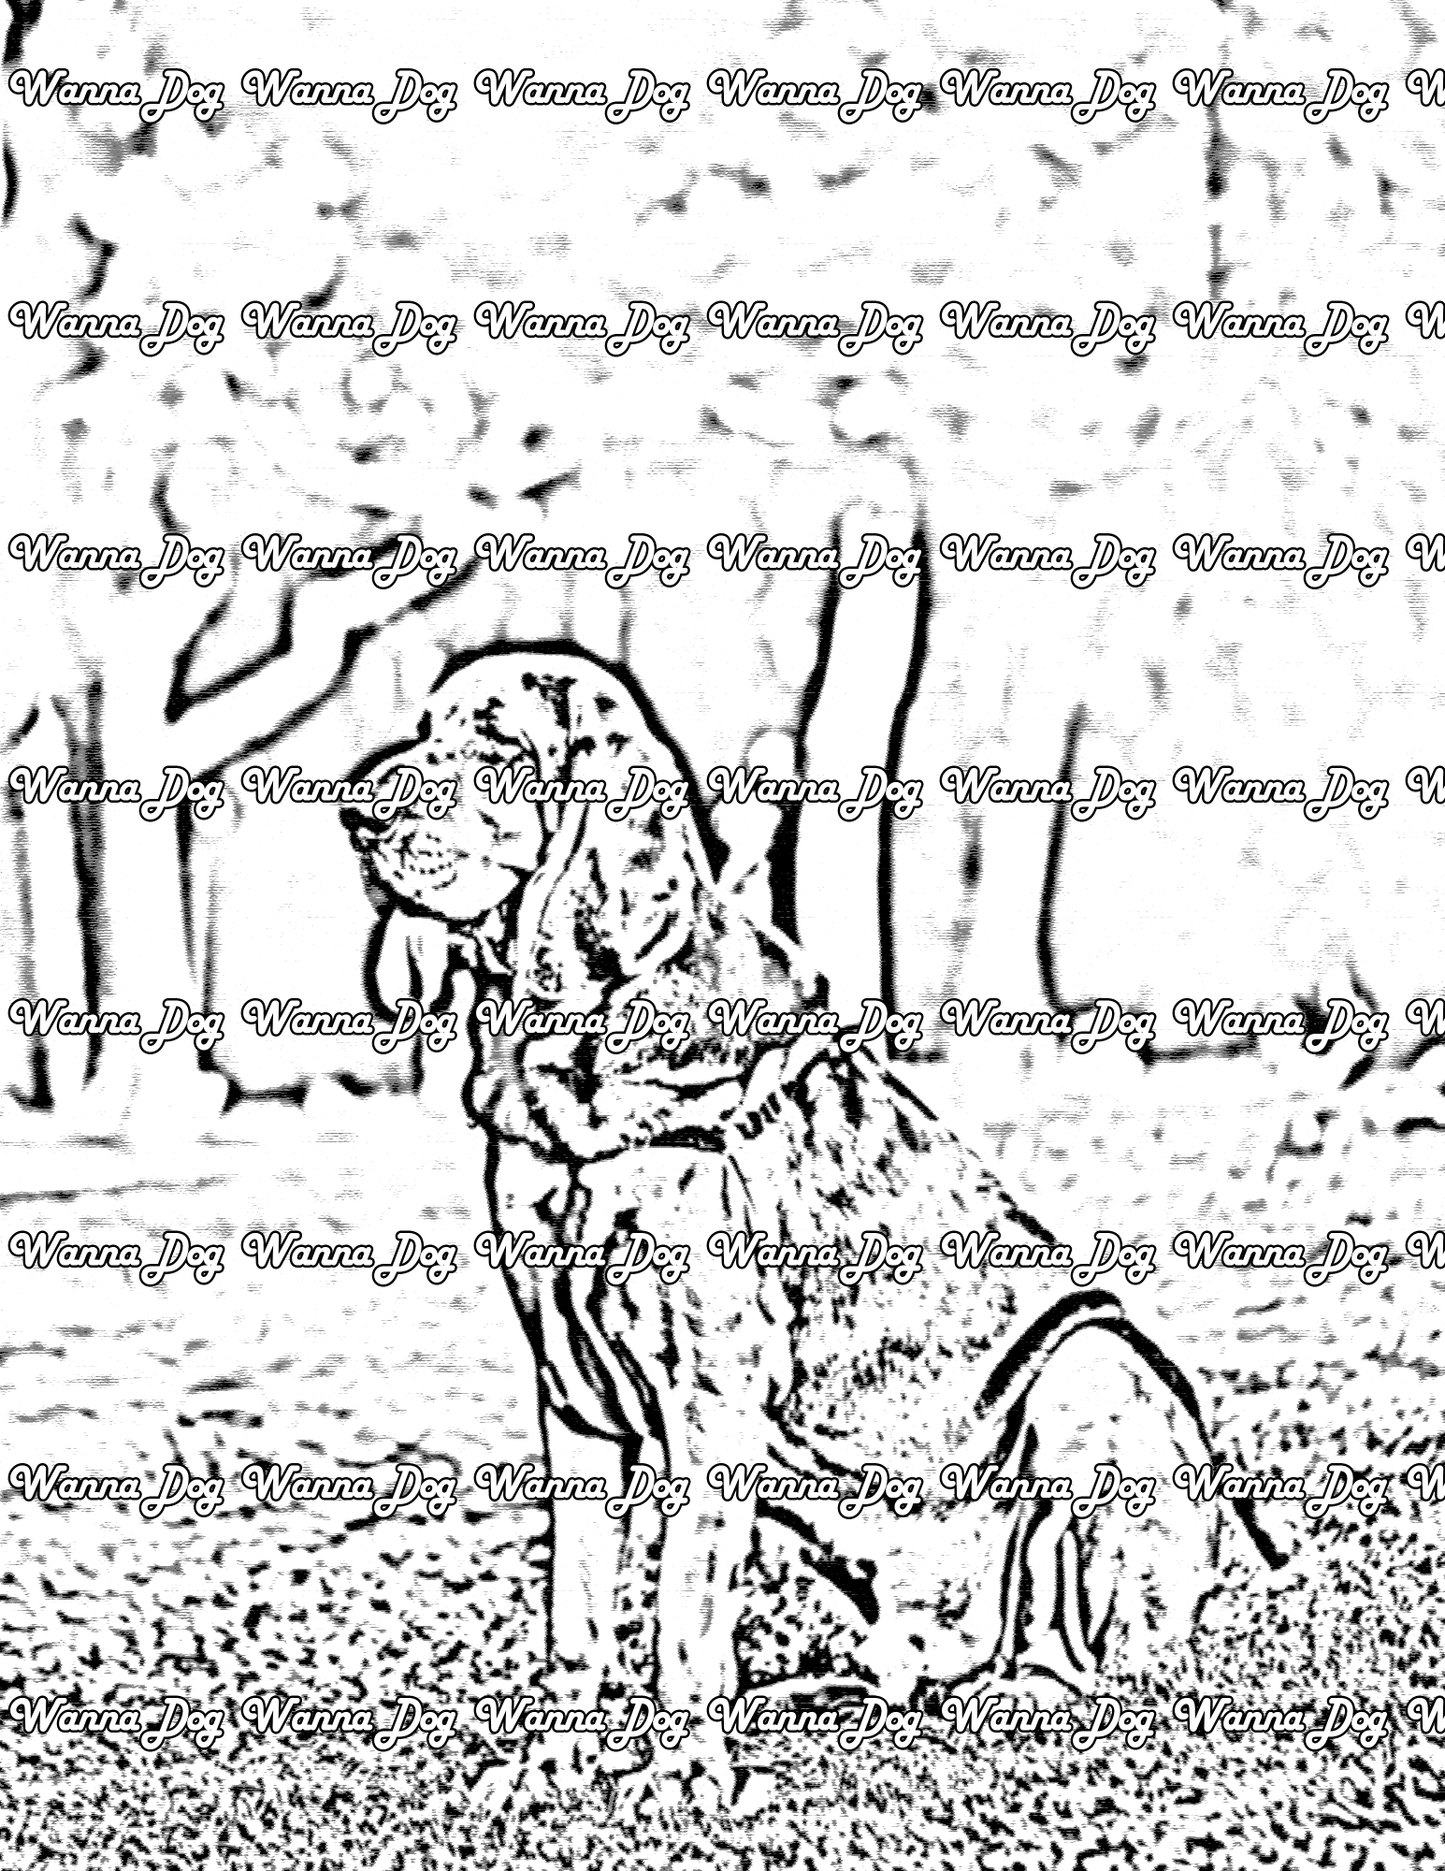 Bloodhound Coloring Page of a Bloodhound sitting in grass